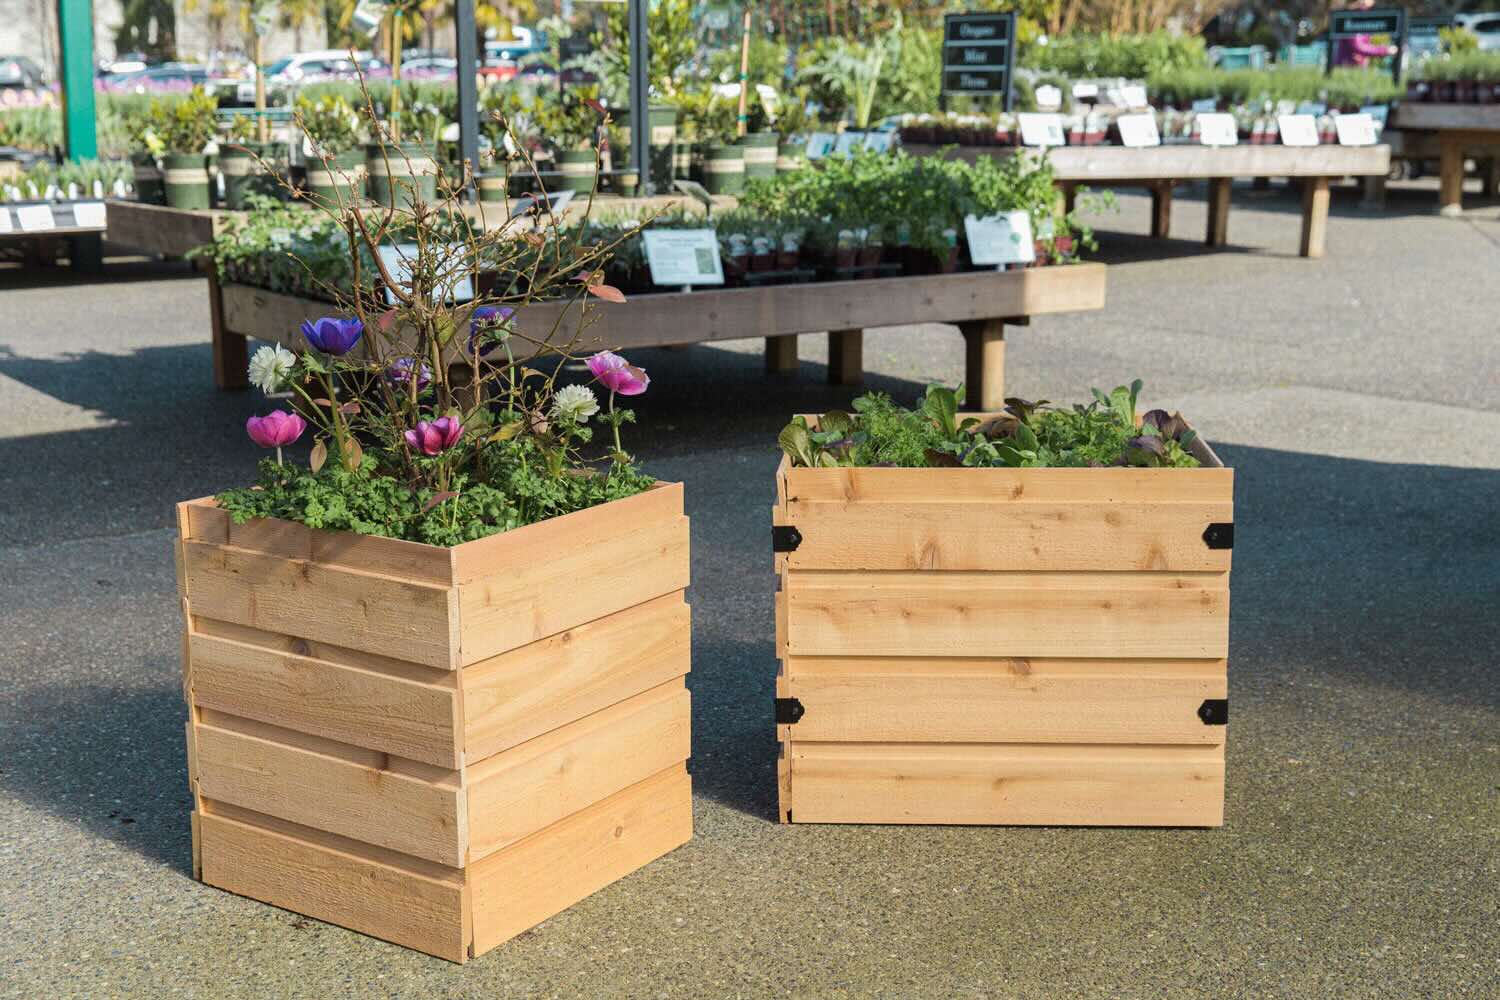 How To Make An Outdoor Planter Box